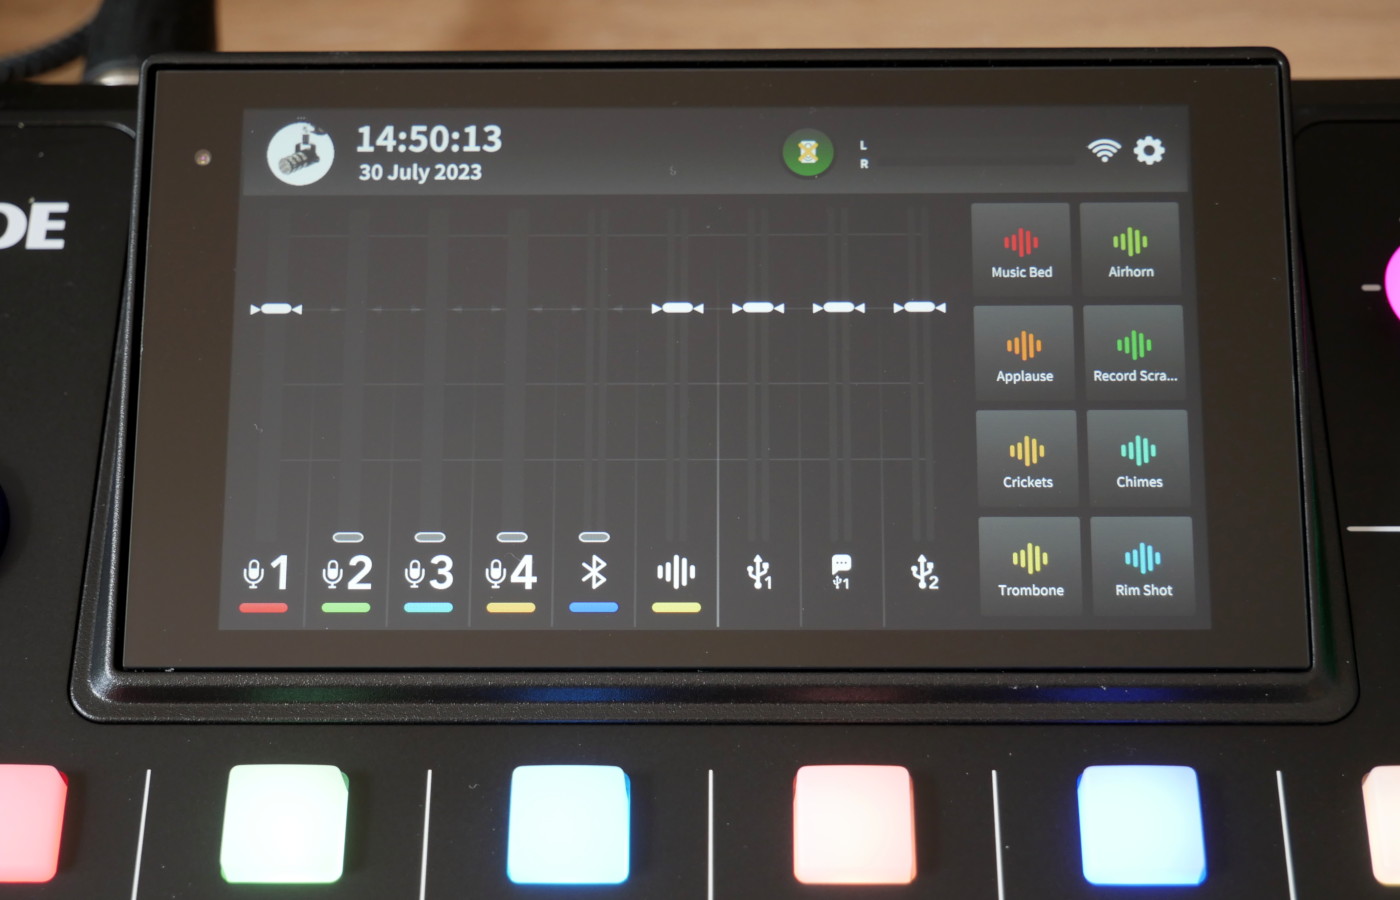 RØDECaster Pro II User Guide, Setting Up Channels and Outputs